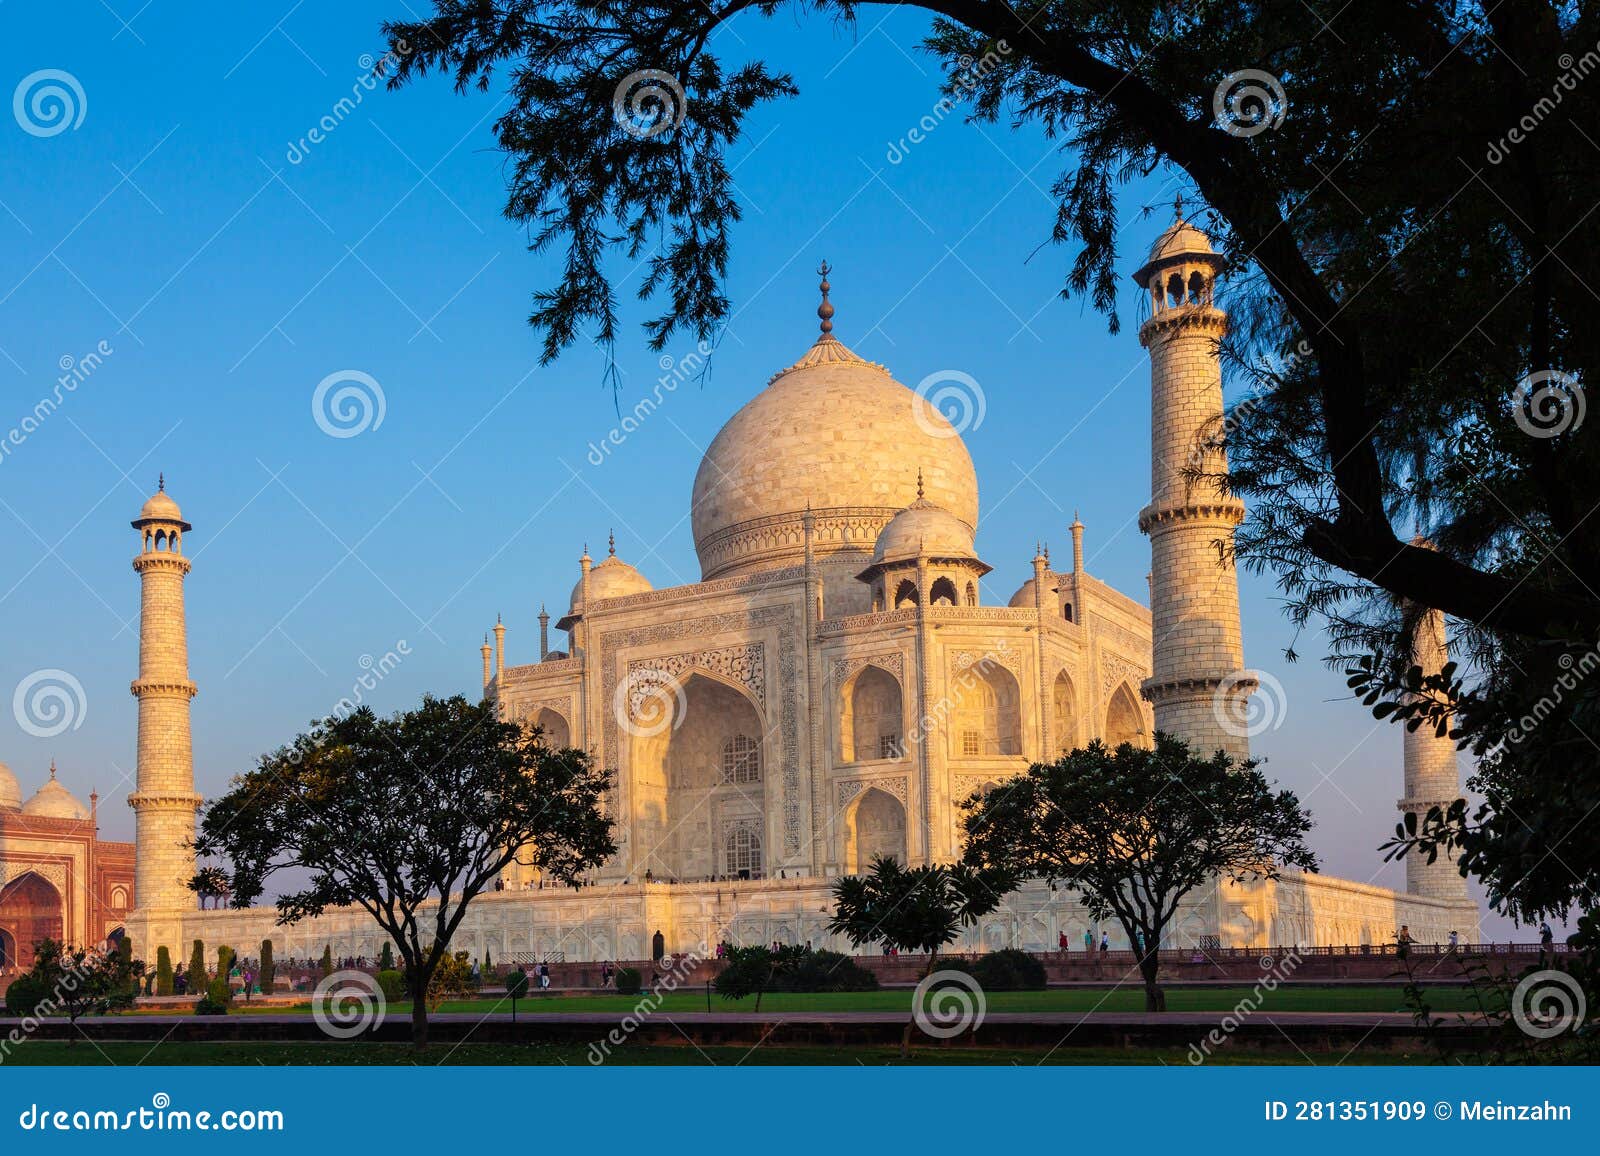 taj mahal in morning light with the inscription of the coran in arabic letter meaning in english: this is an invitation to live on